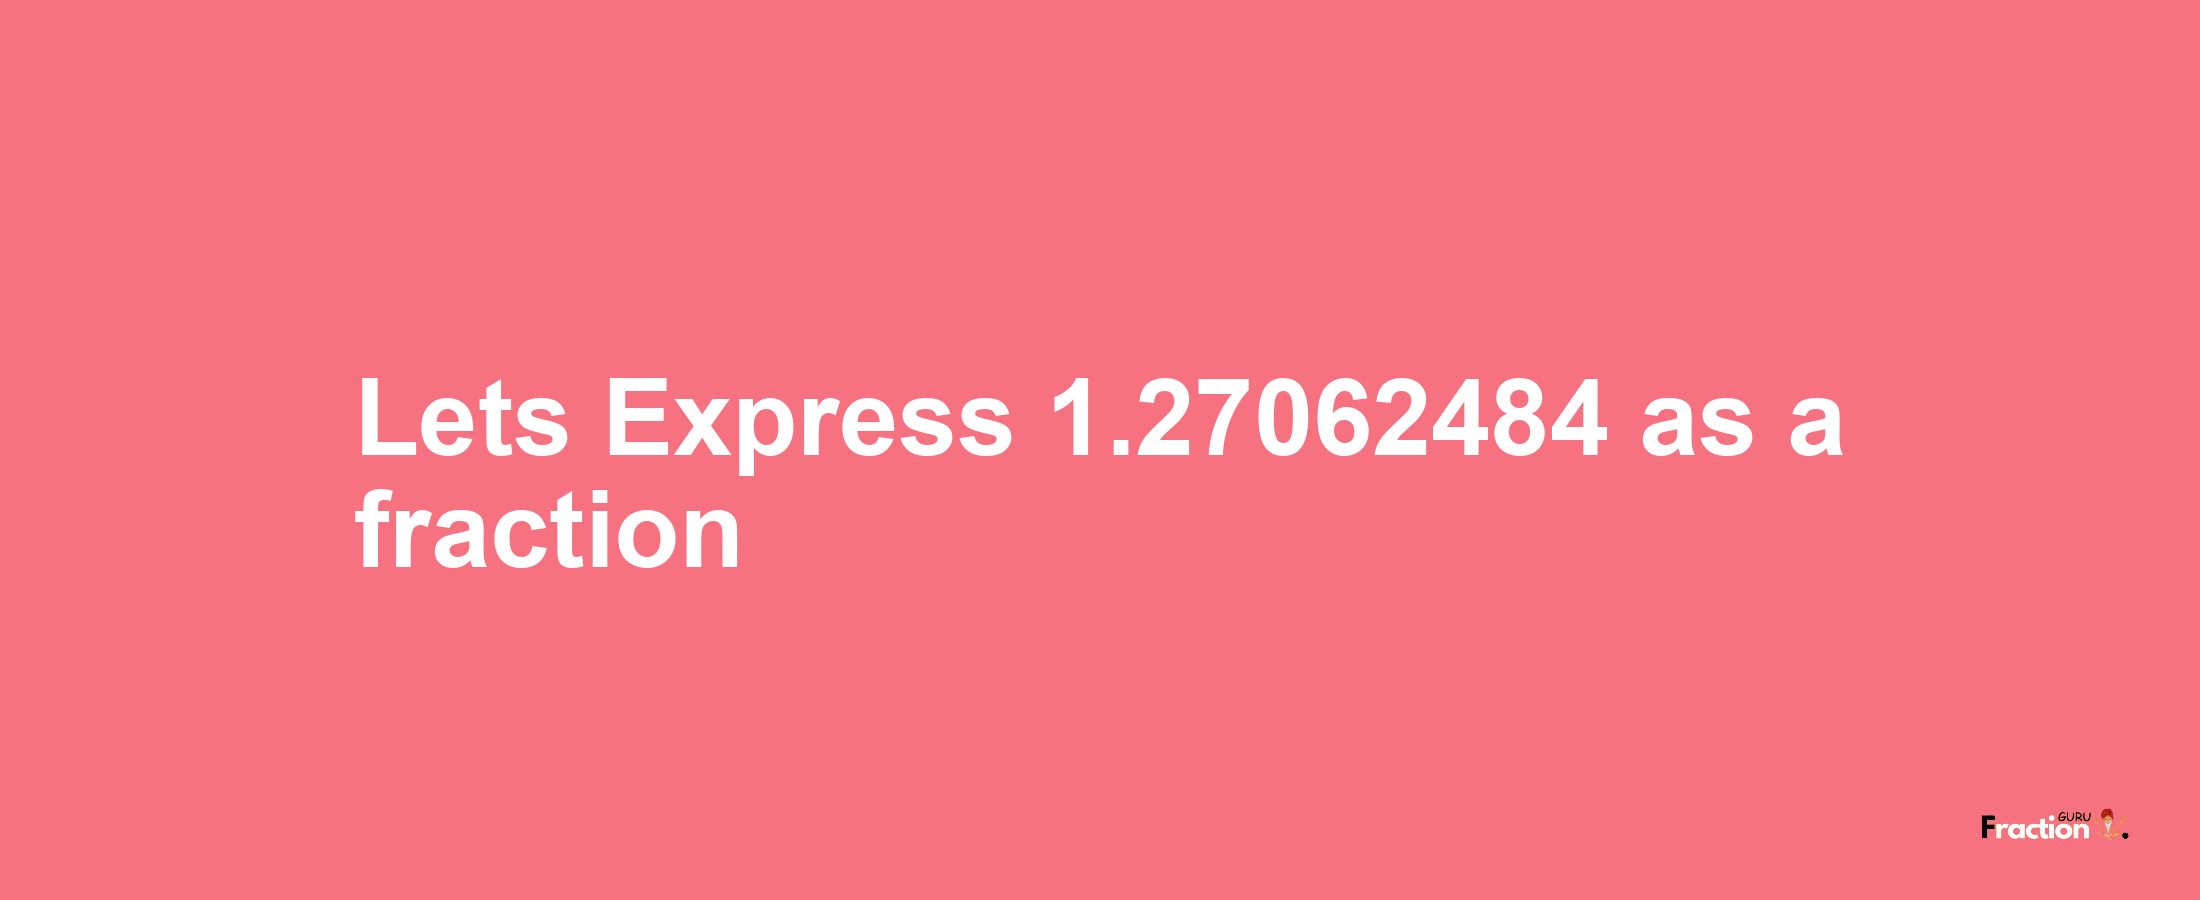 Lets Express 1.27062484 as afraction